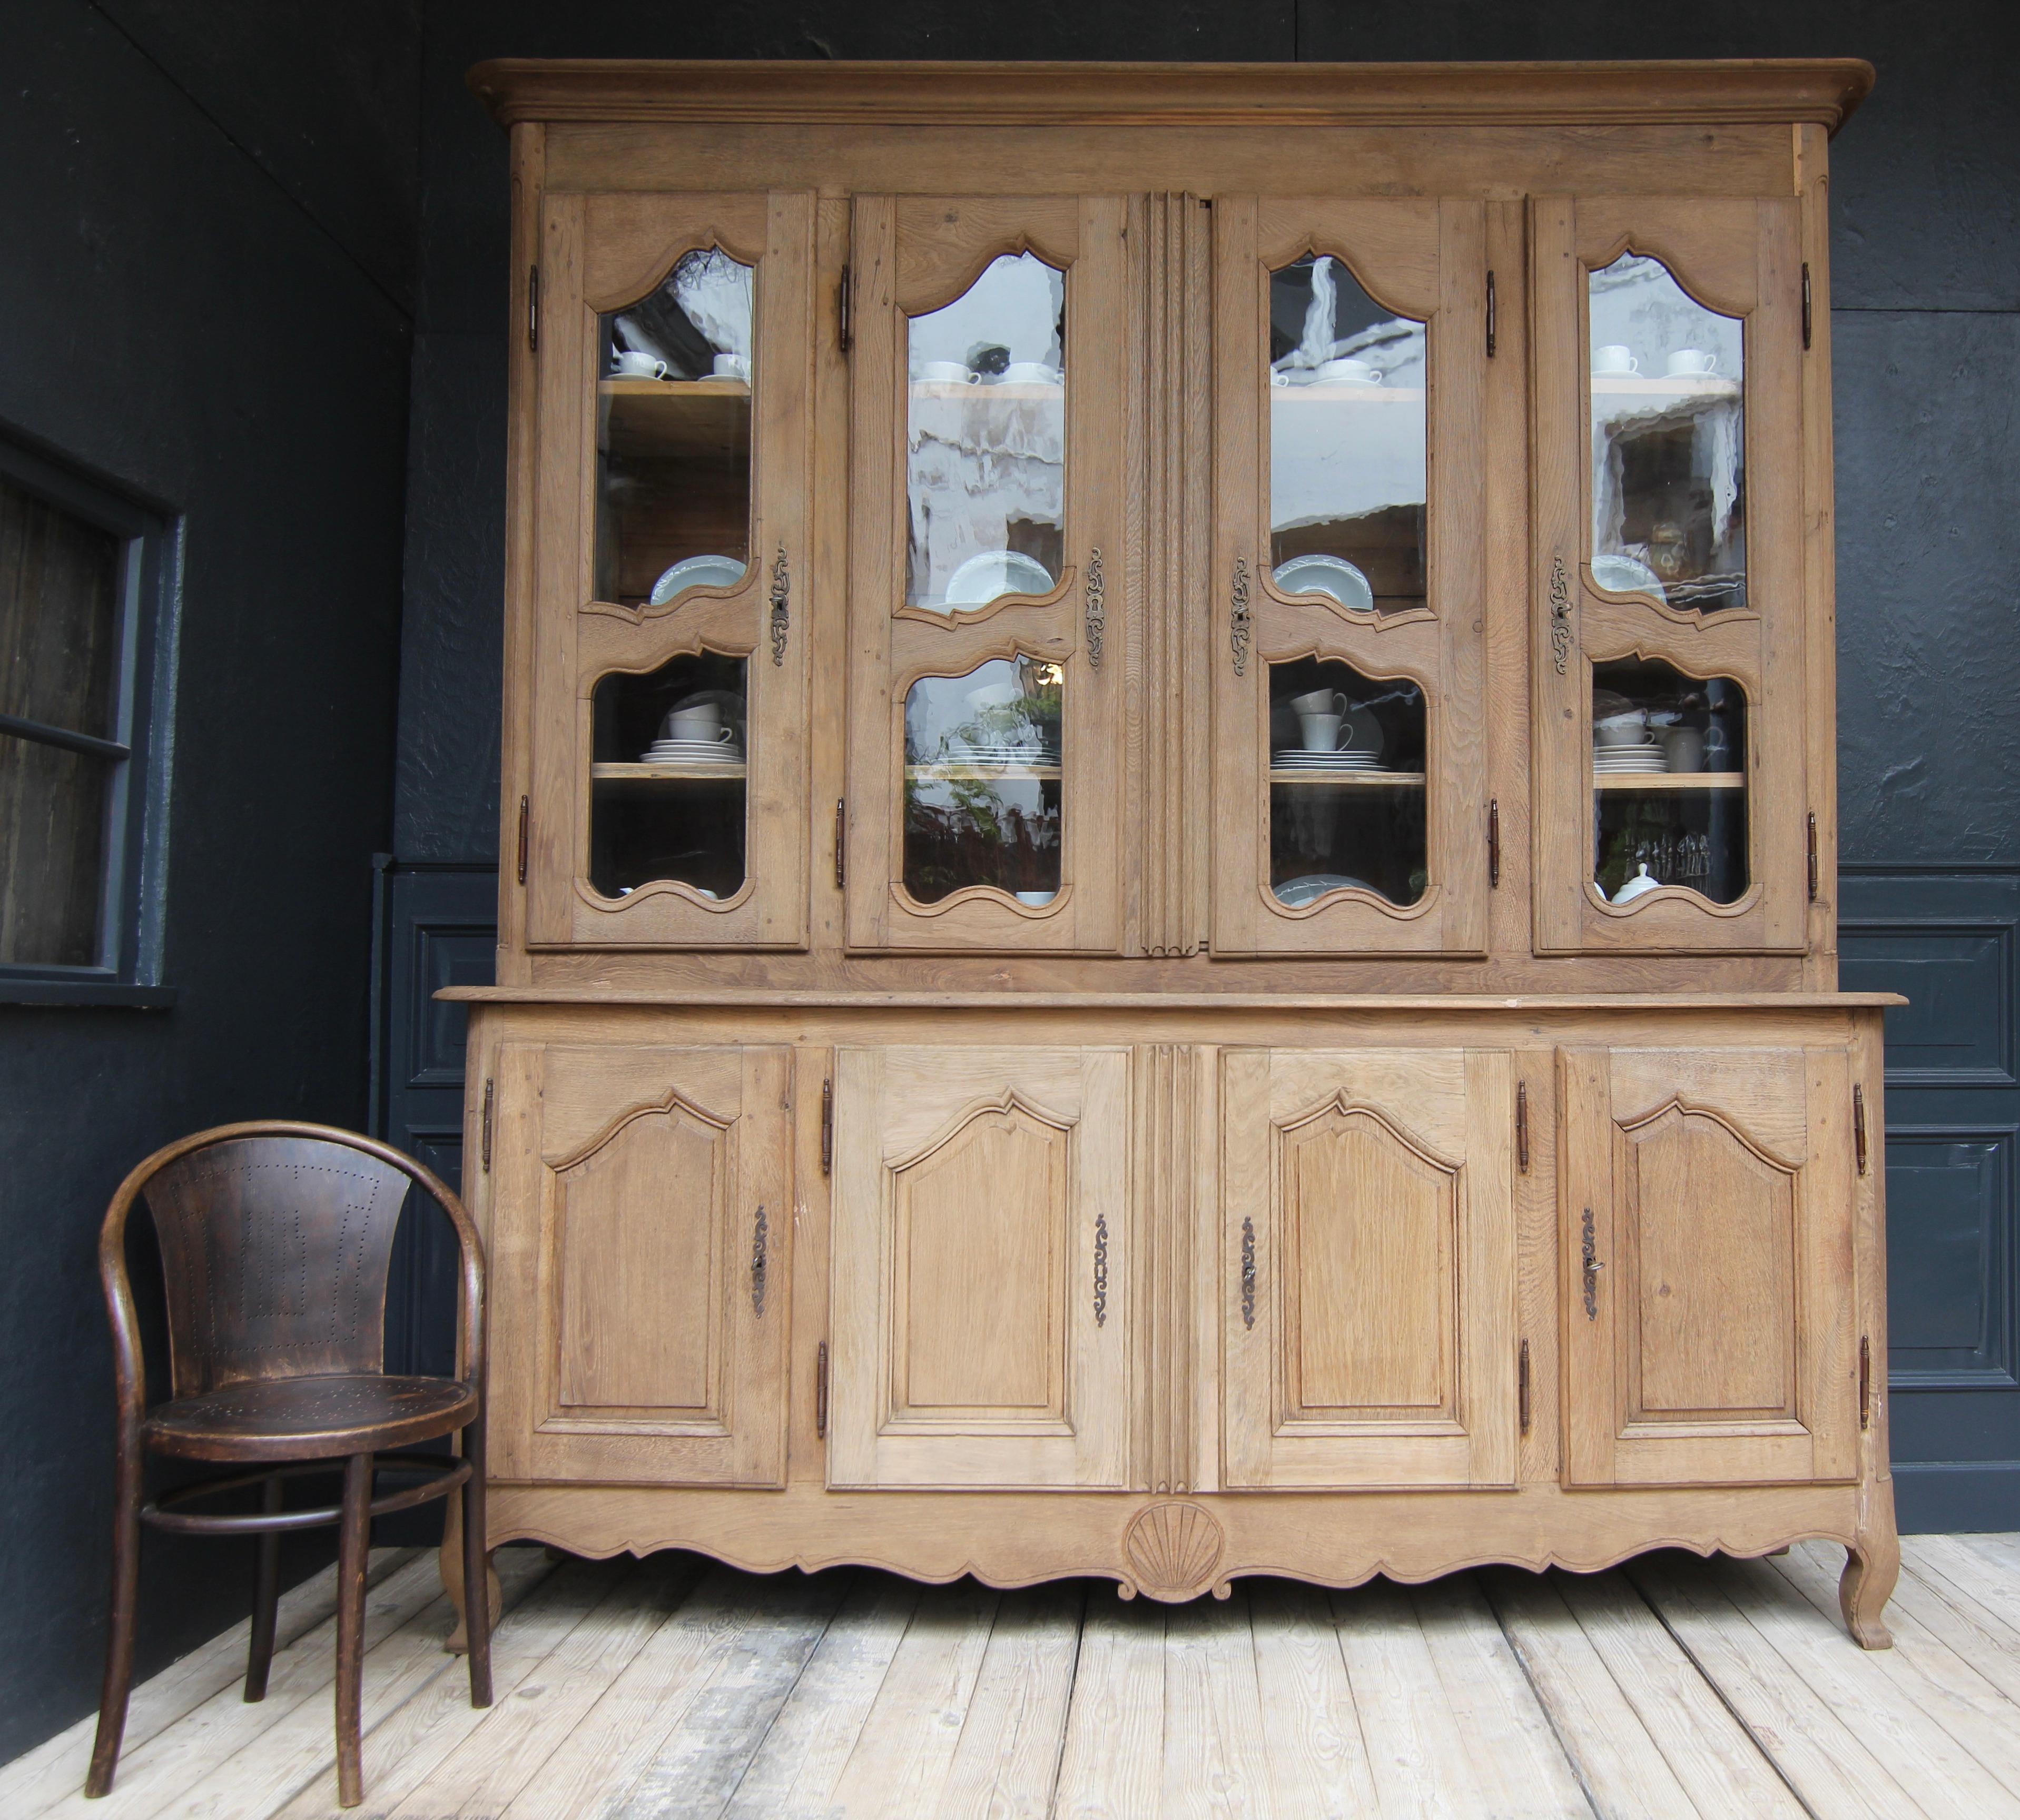 Large French provincial buffet à deux corps from the early 19th century. 

Two-part oak corpus standing on 4 feet and coffered at the sides with rounded pilasters and a total of 8 doors in frame construction hung on iron fittings on the outside.